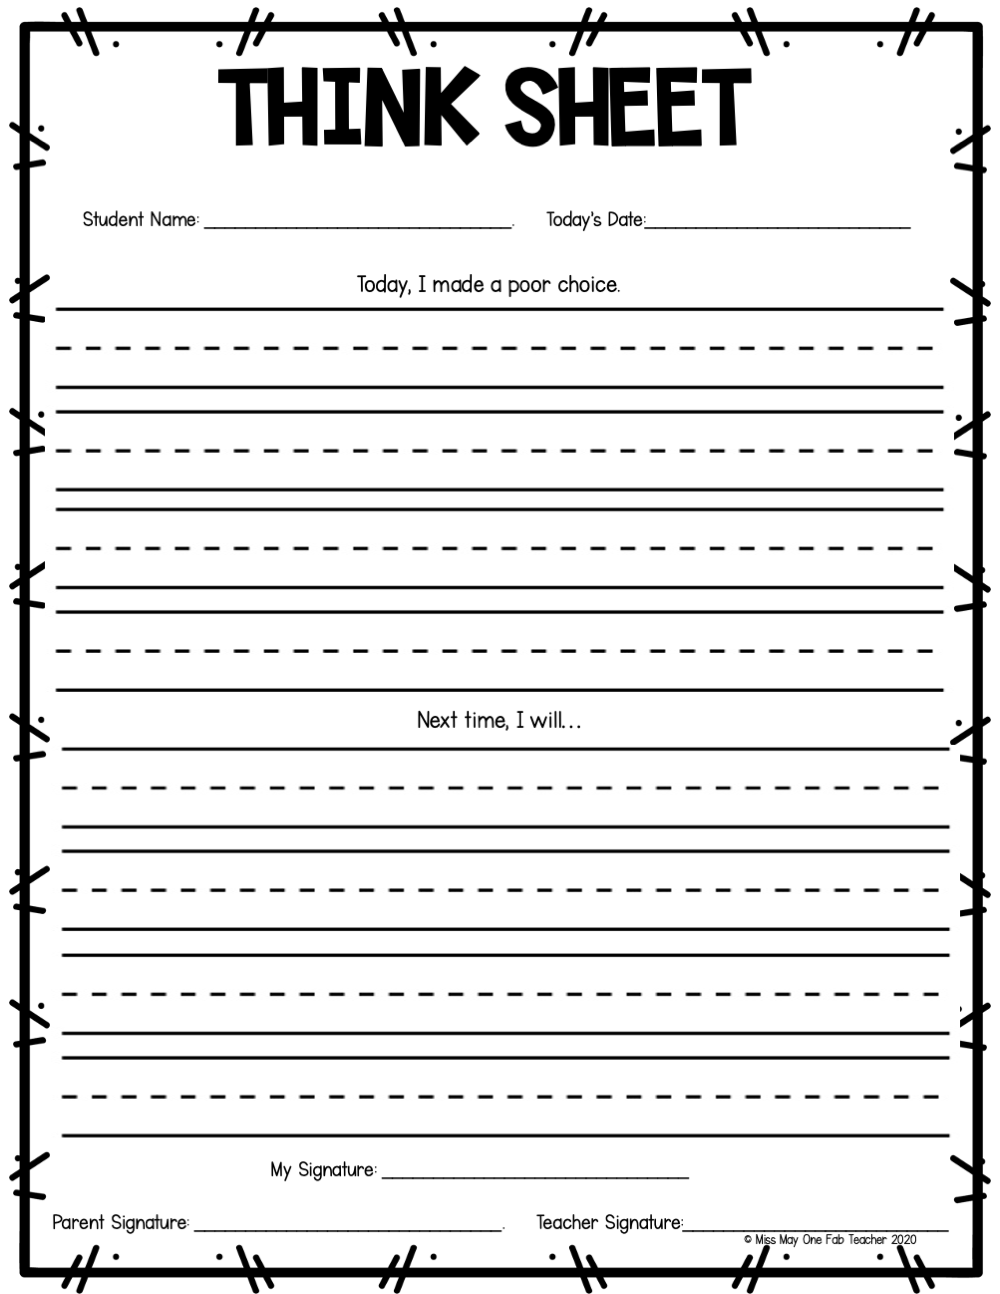 Behavior Think Sheets for Elementary Students